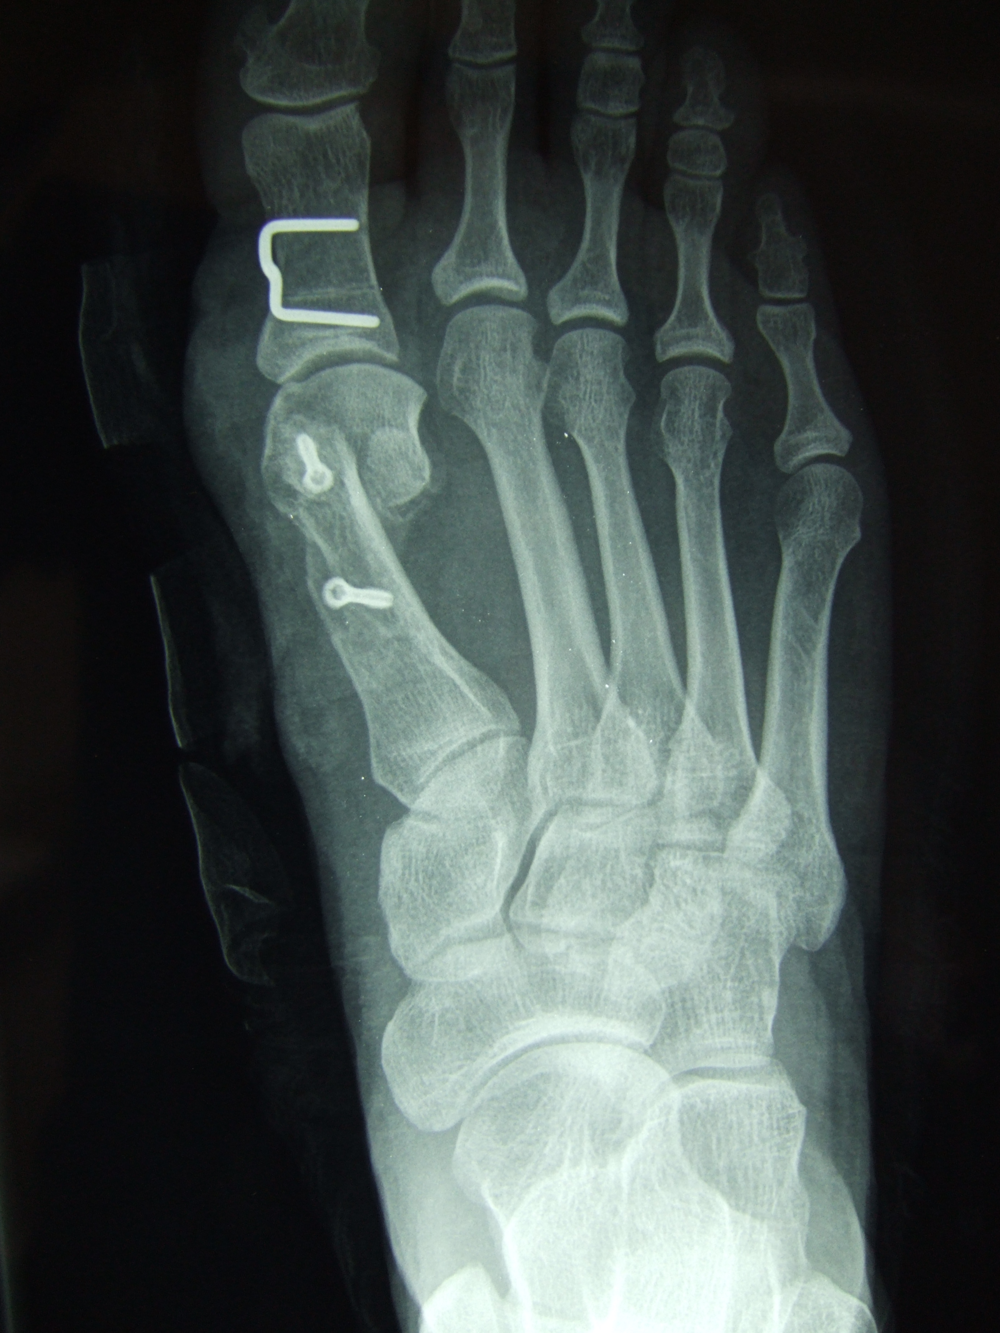 What is the common name for a hallux valgus?